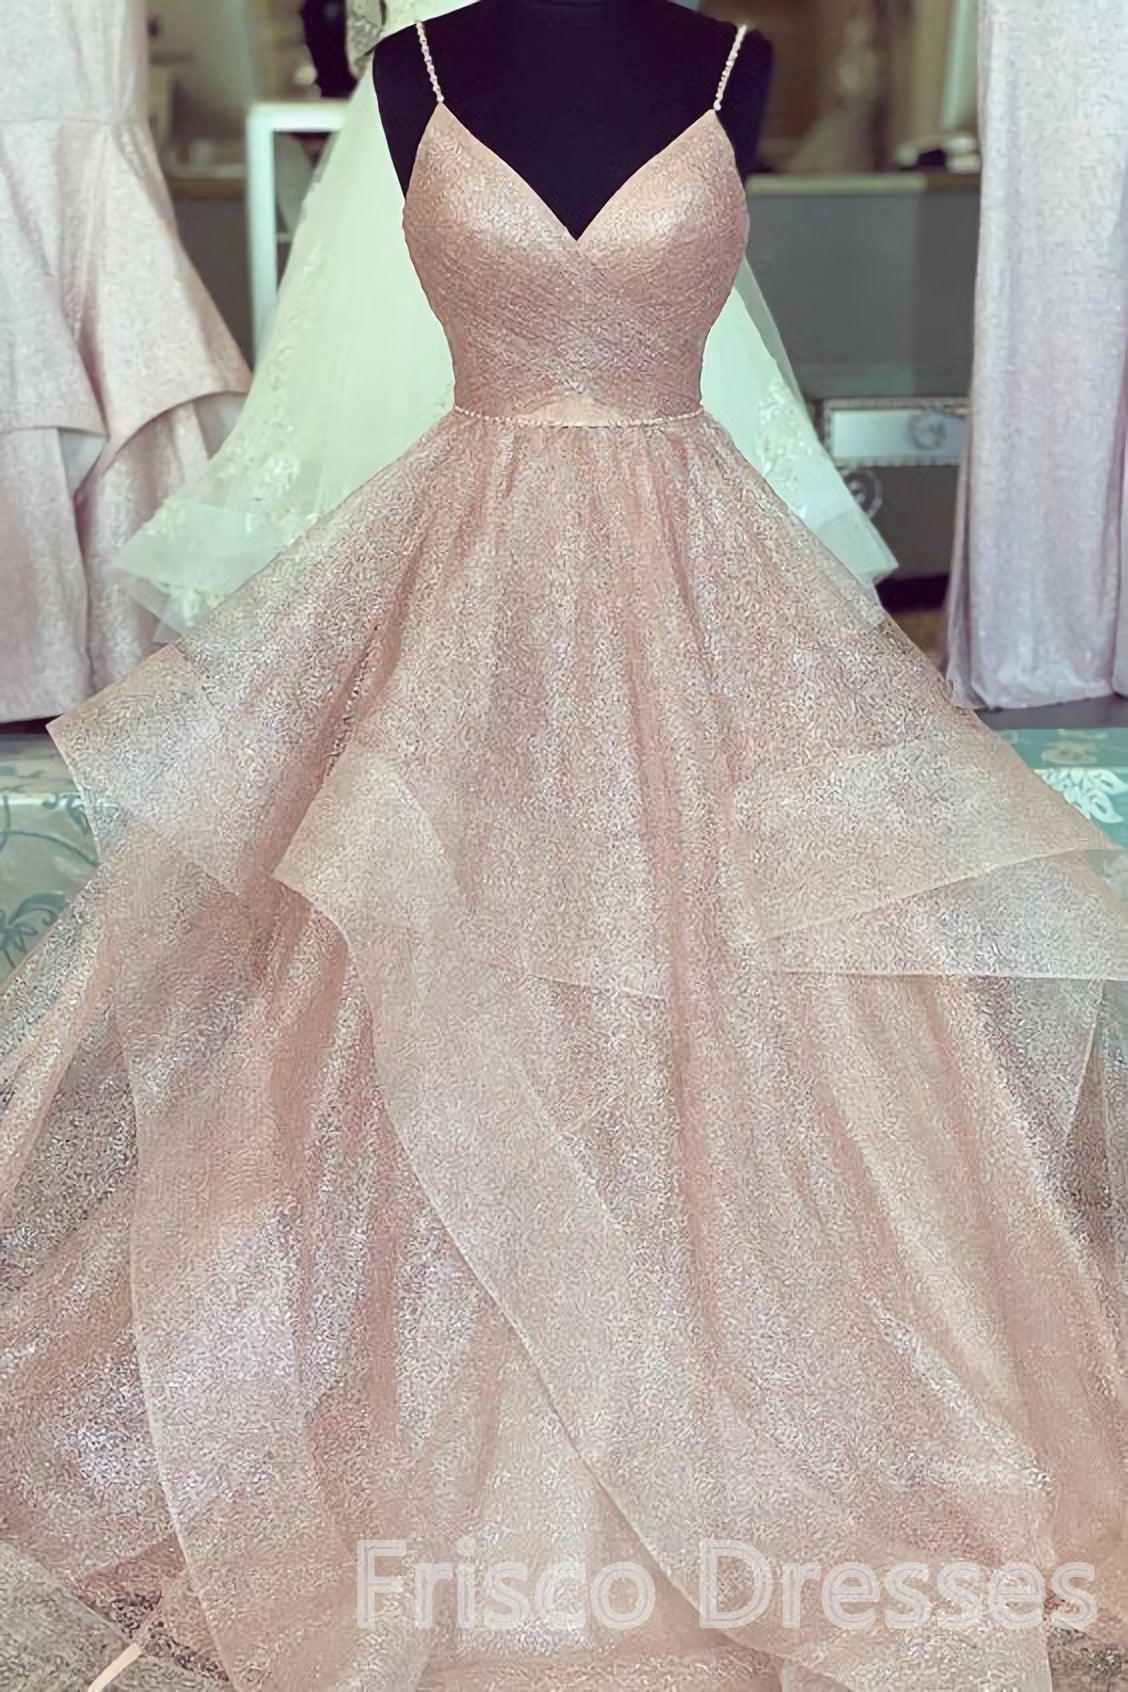 Party Dresses On Sale, A Line Rose Gold Pleated Bodice Ruffled Long Prom Dresses